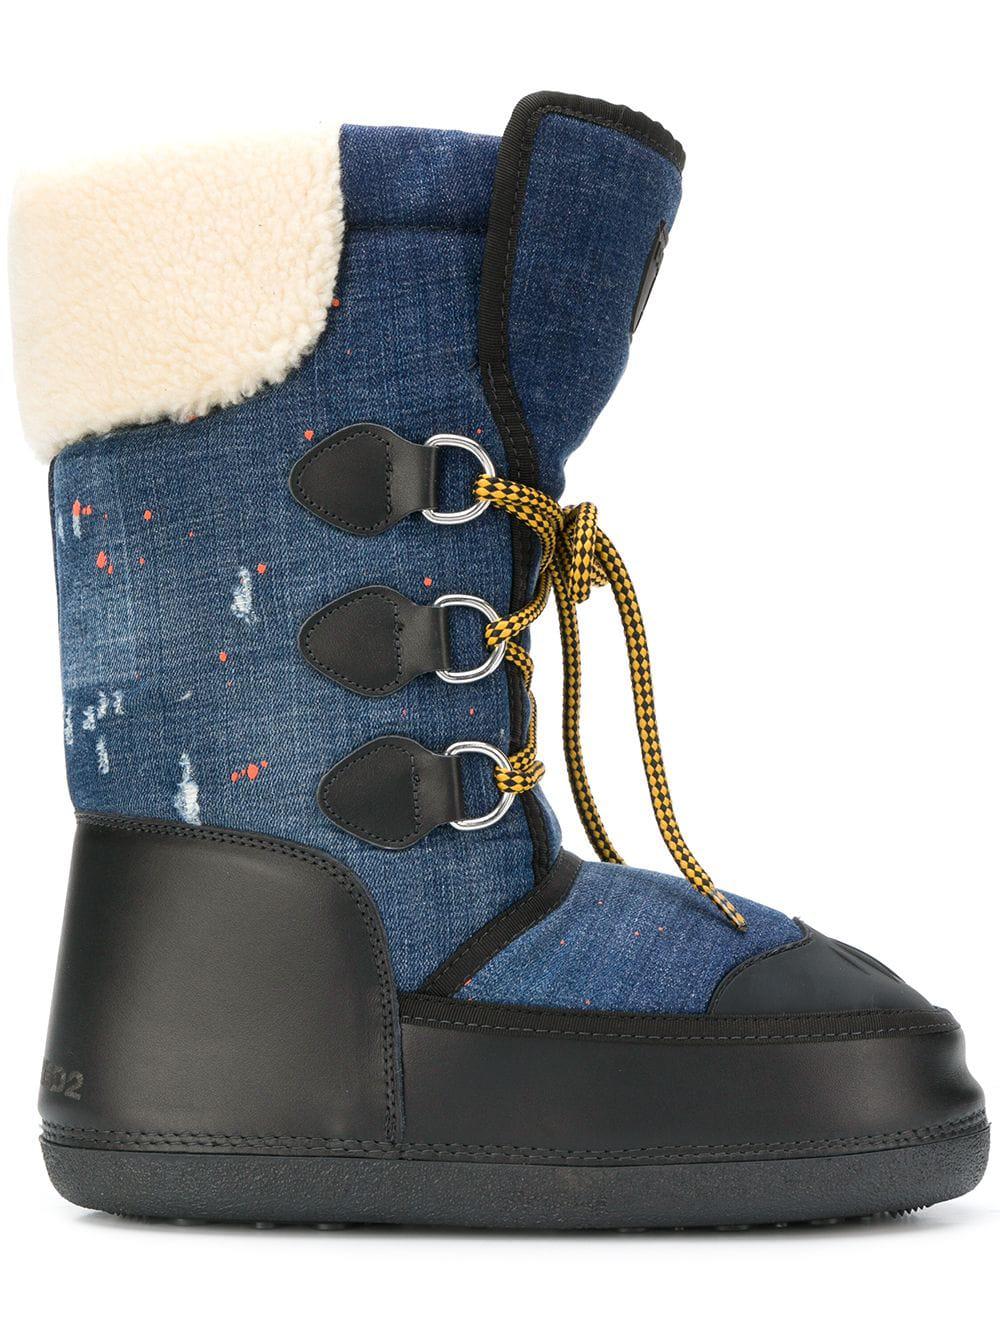 DSquared² Leather After Ski Boots in Blue for Men - Lyst